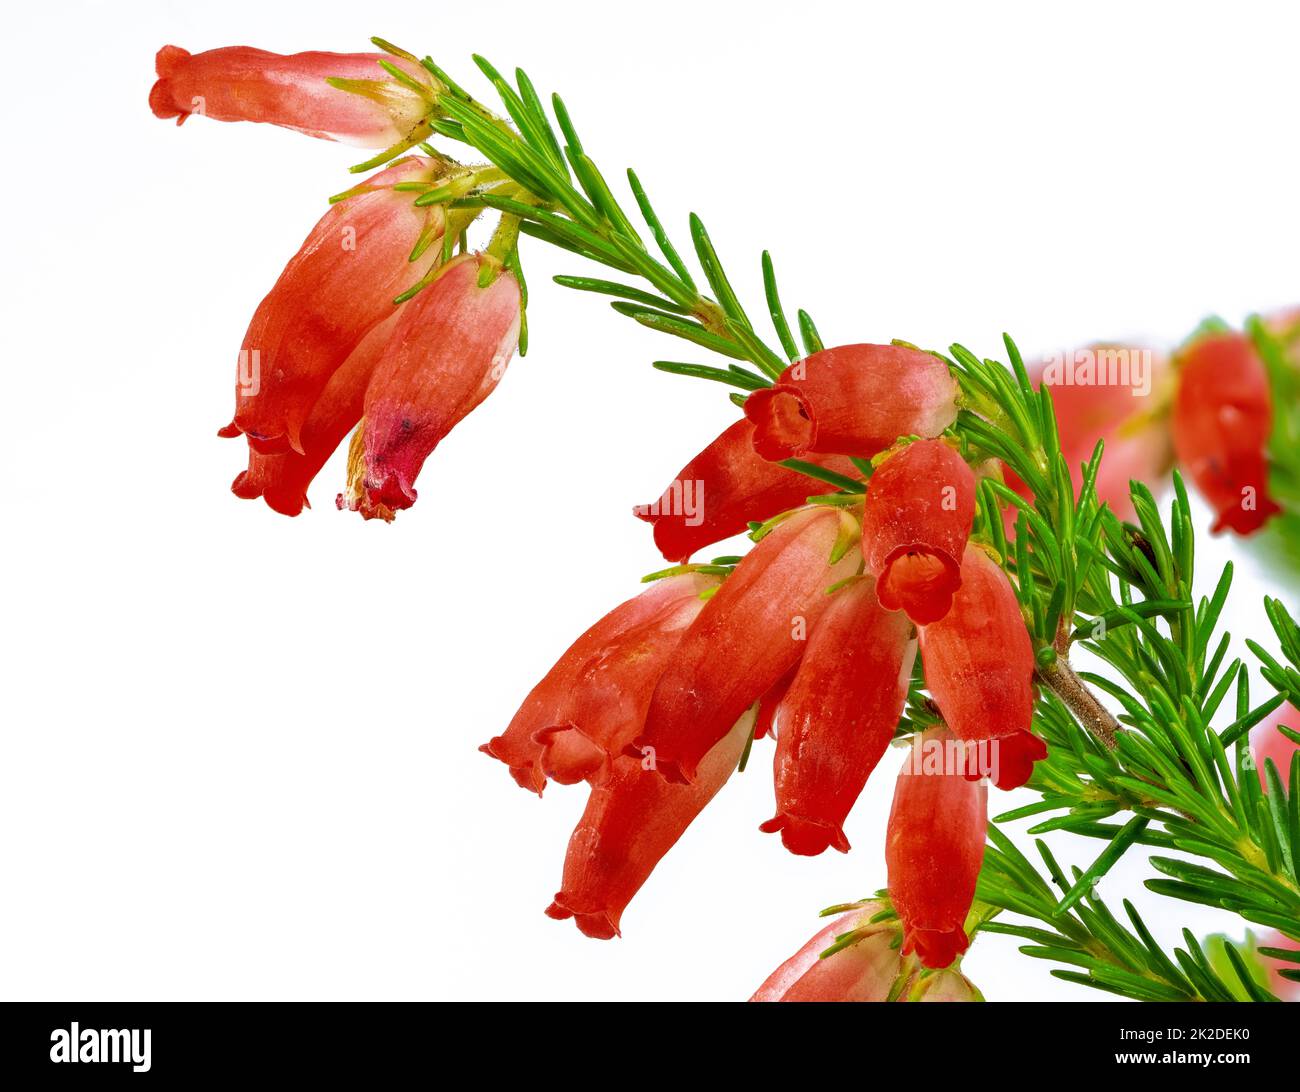 Isolated red erica flower blossoms Stock Photo